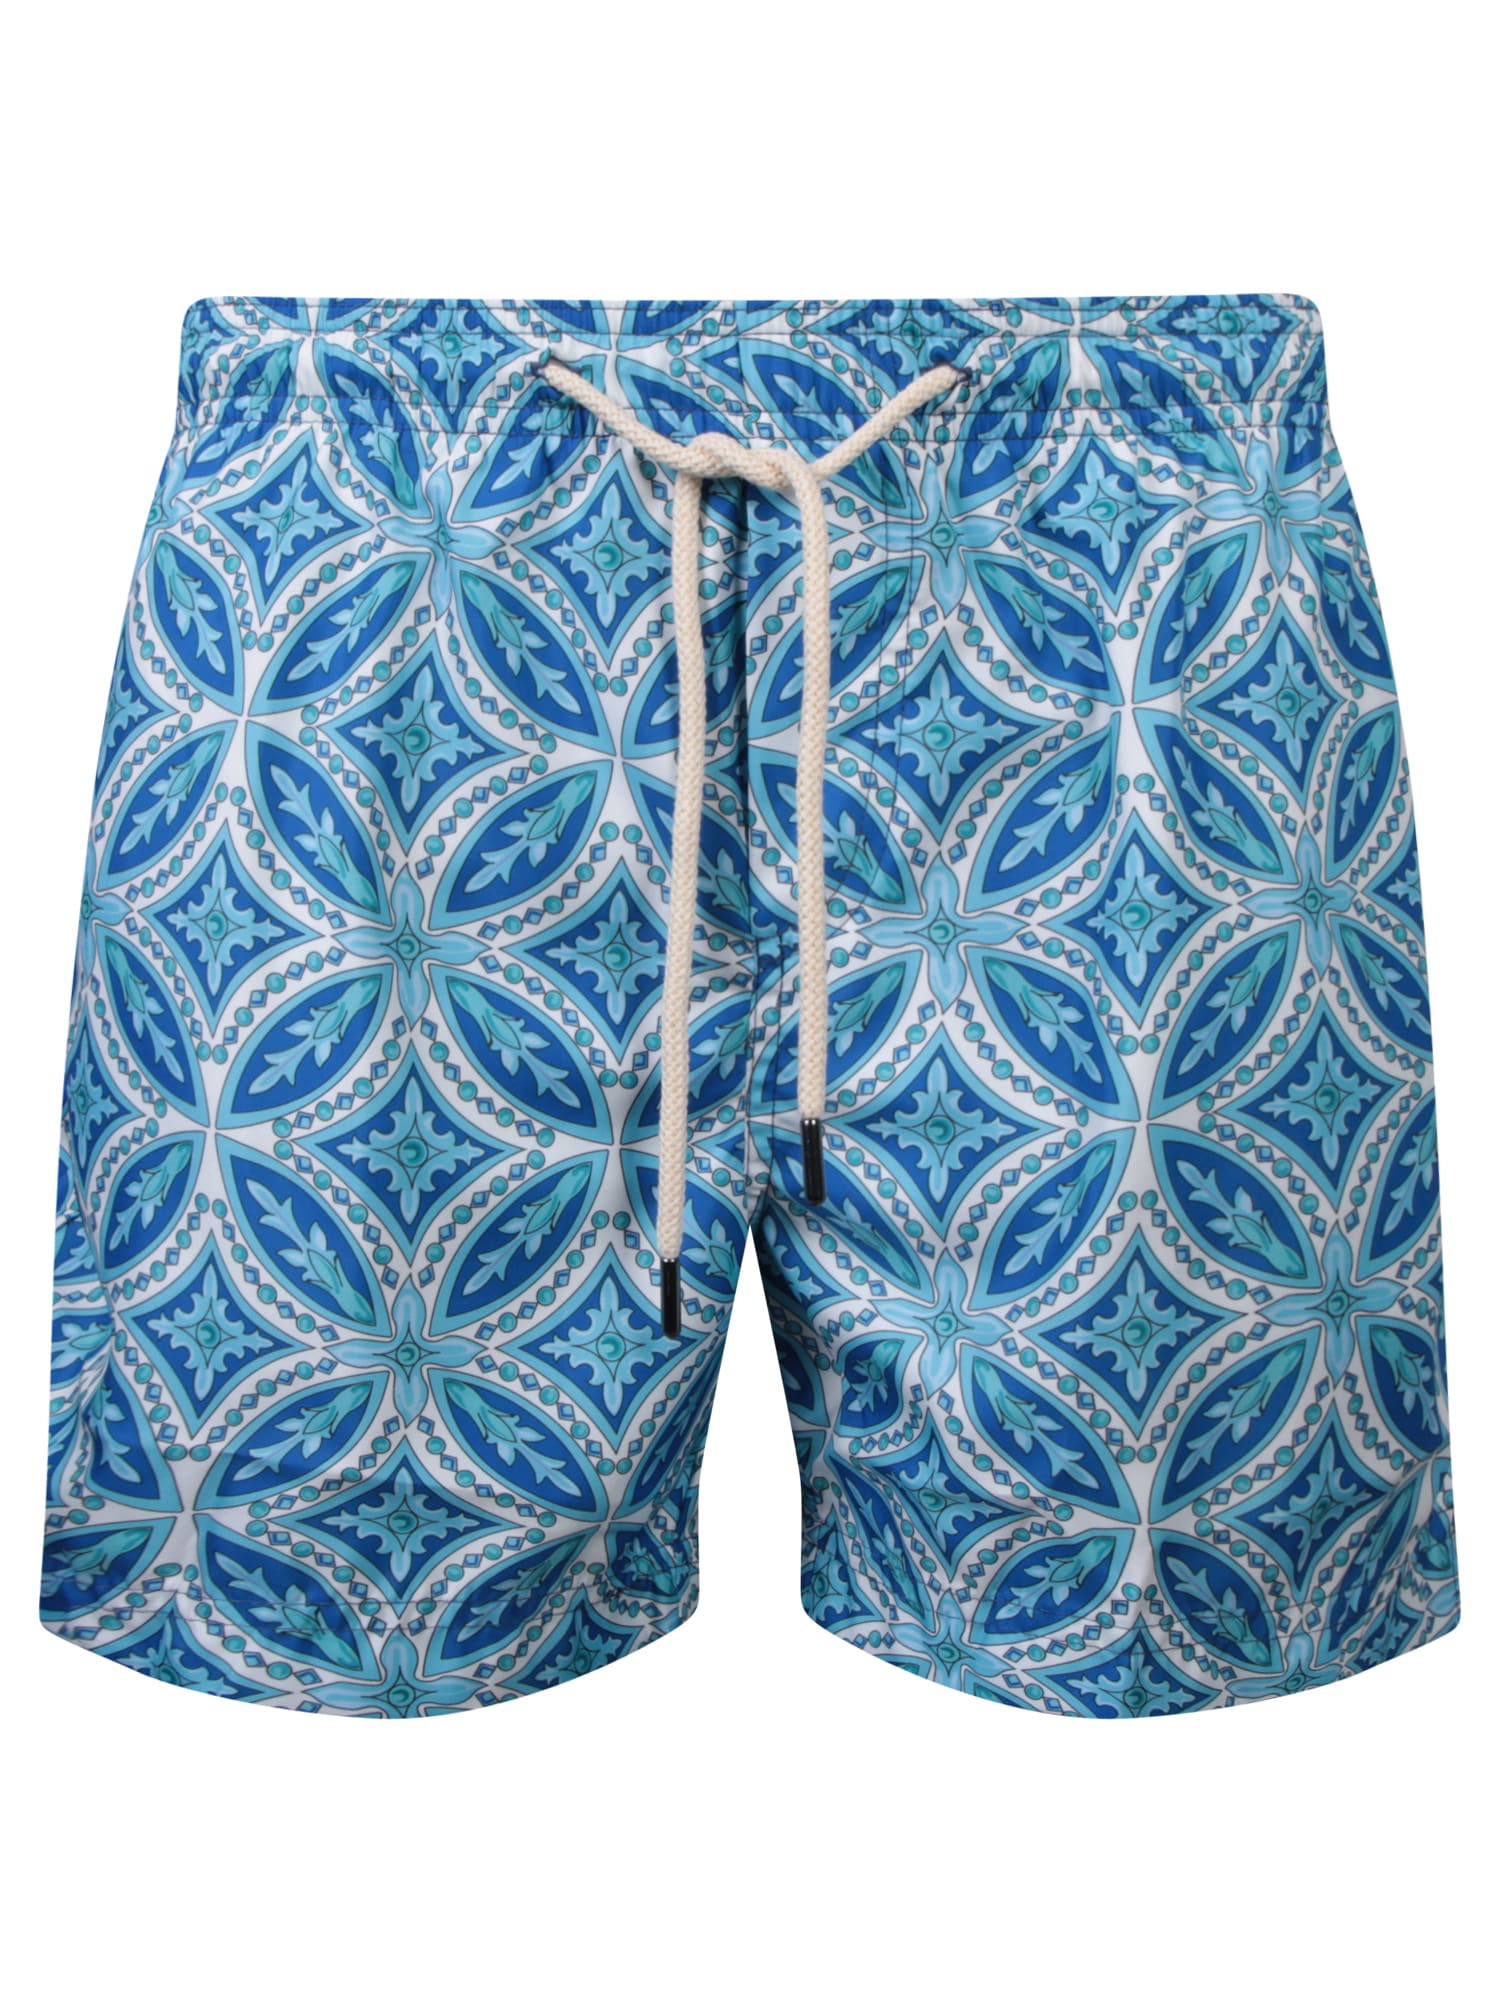 Patterned Swim Shorts In Sky Blue/blue/white By Peninsula